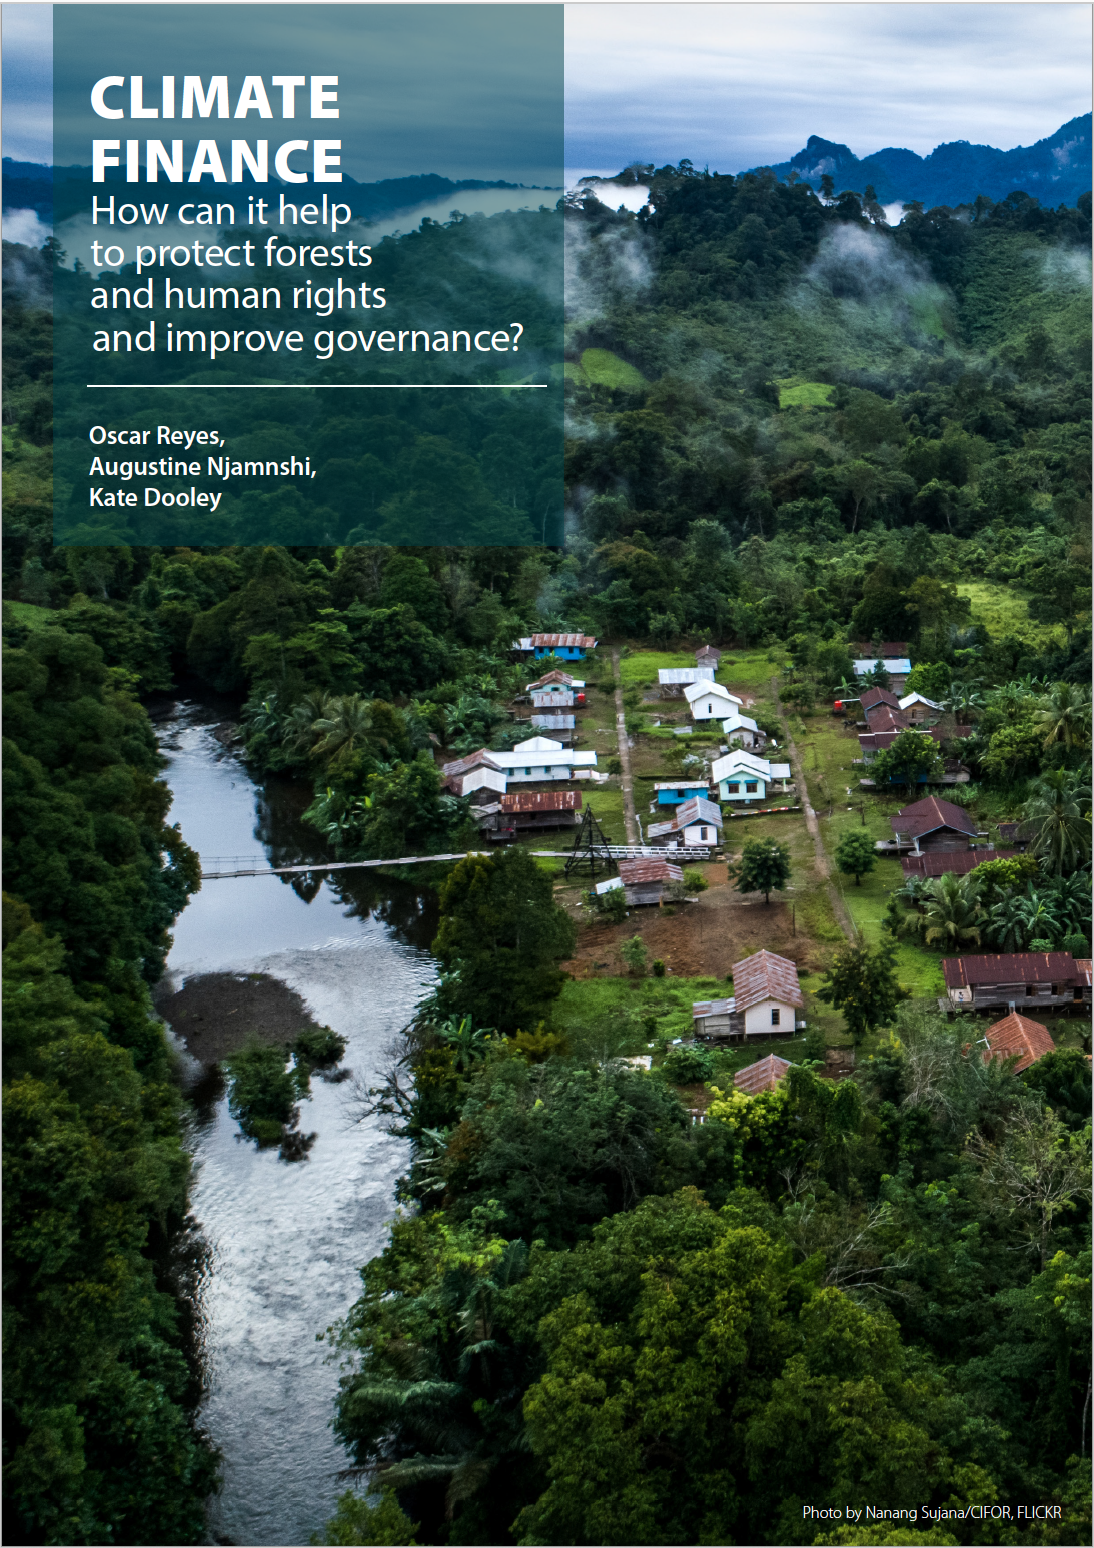 CLIMATE FINANCE - How can it help to protect forests and human rights and improve governance?